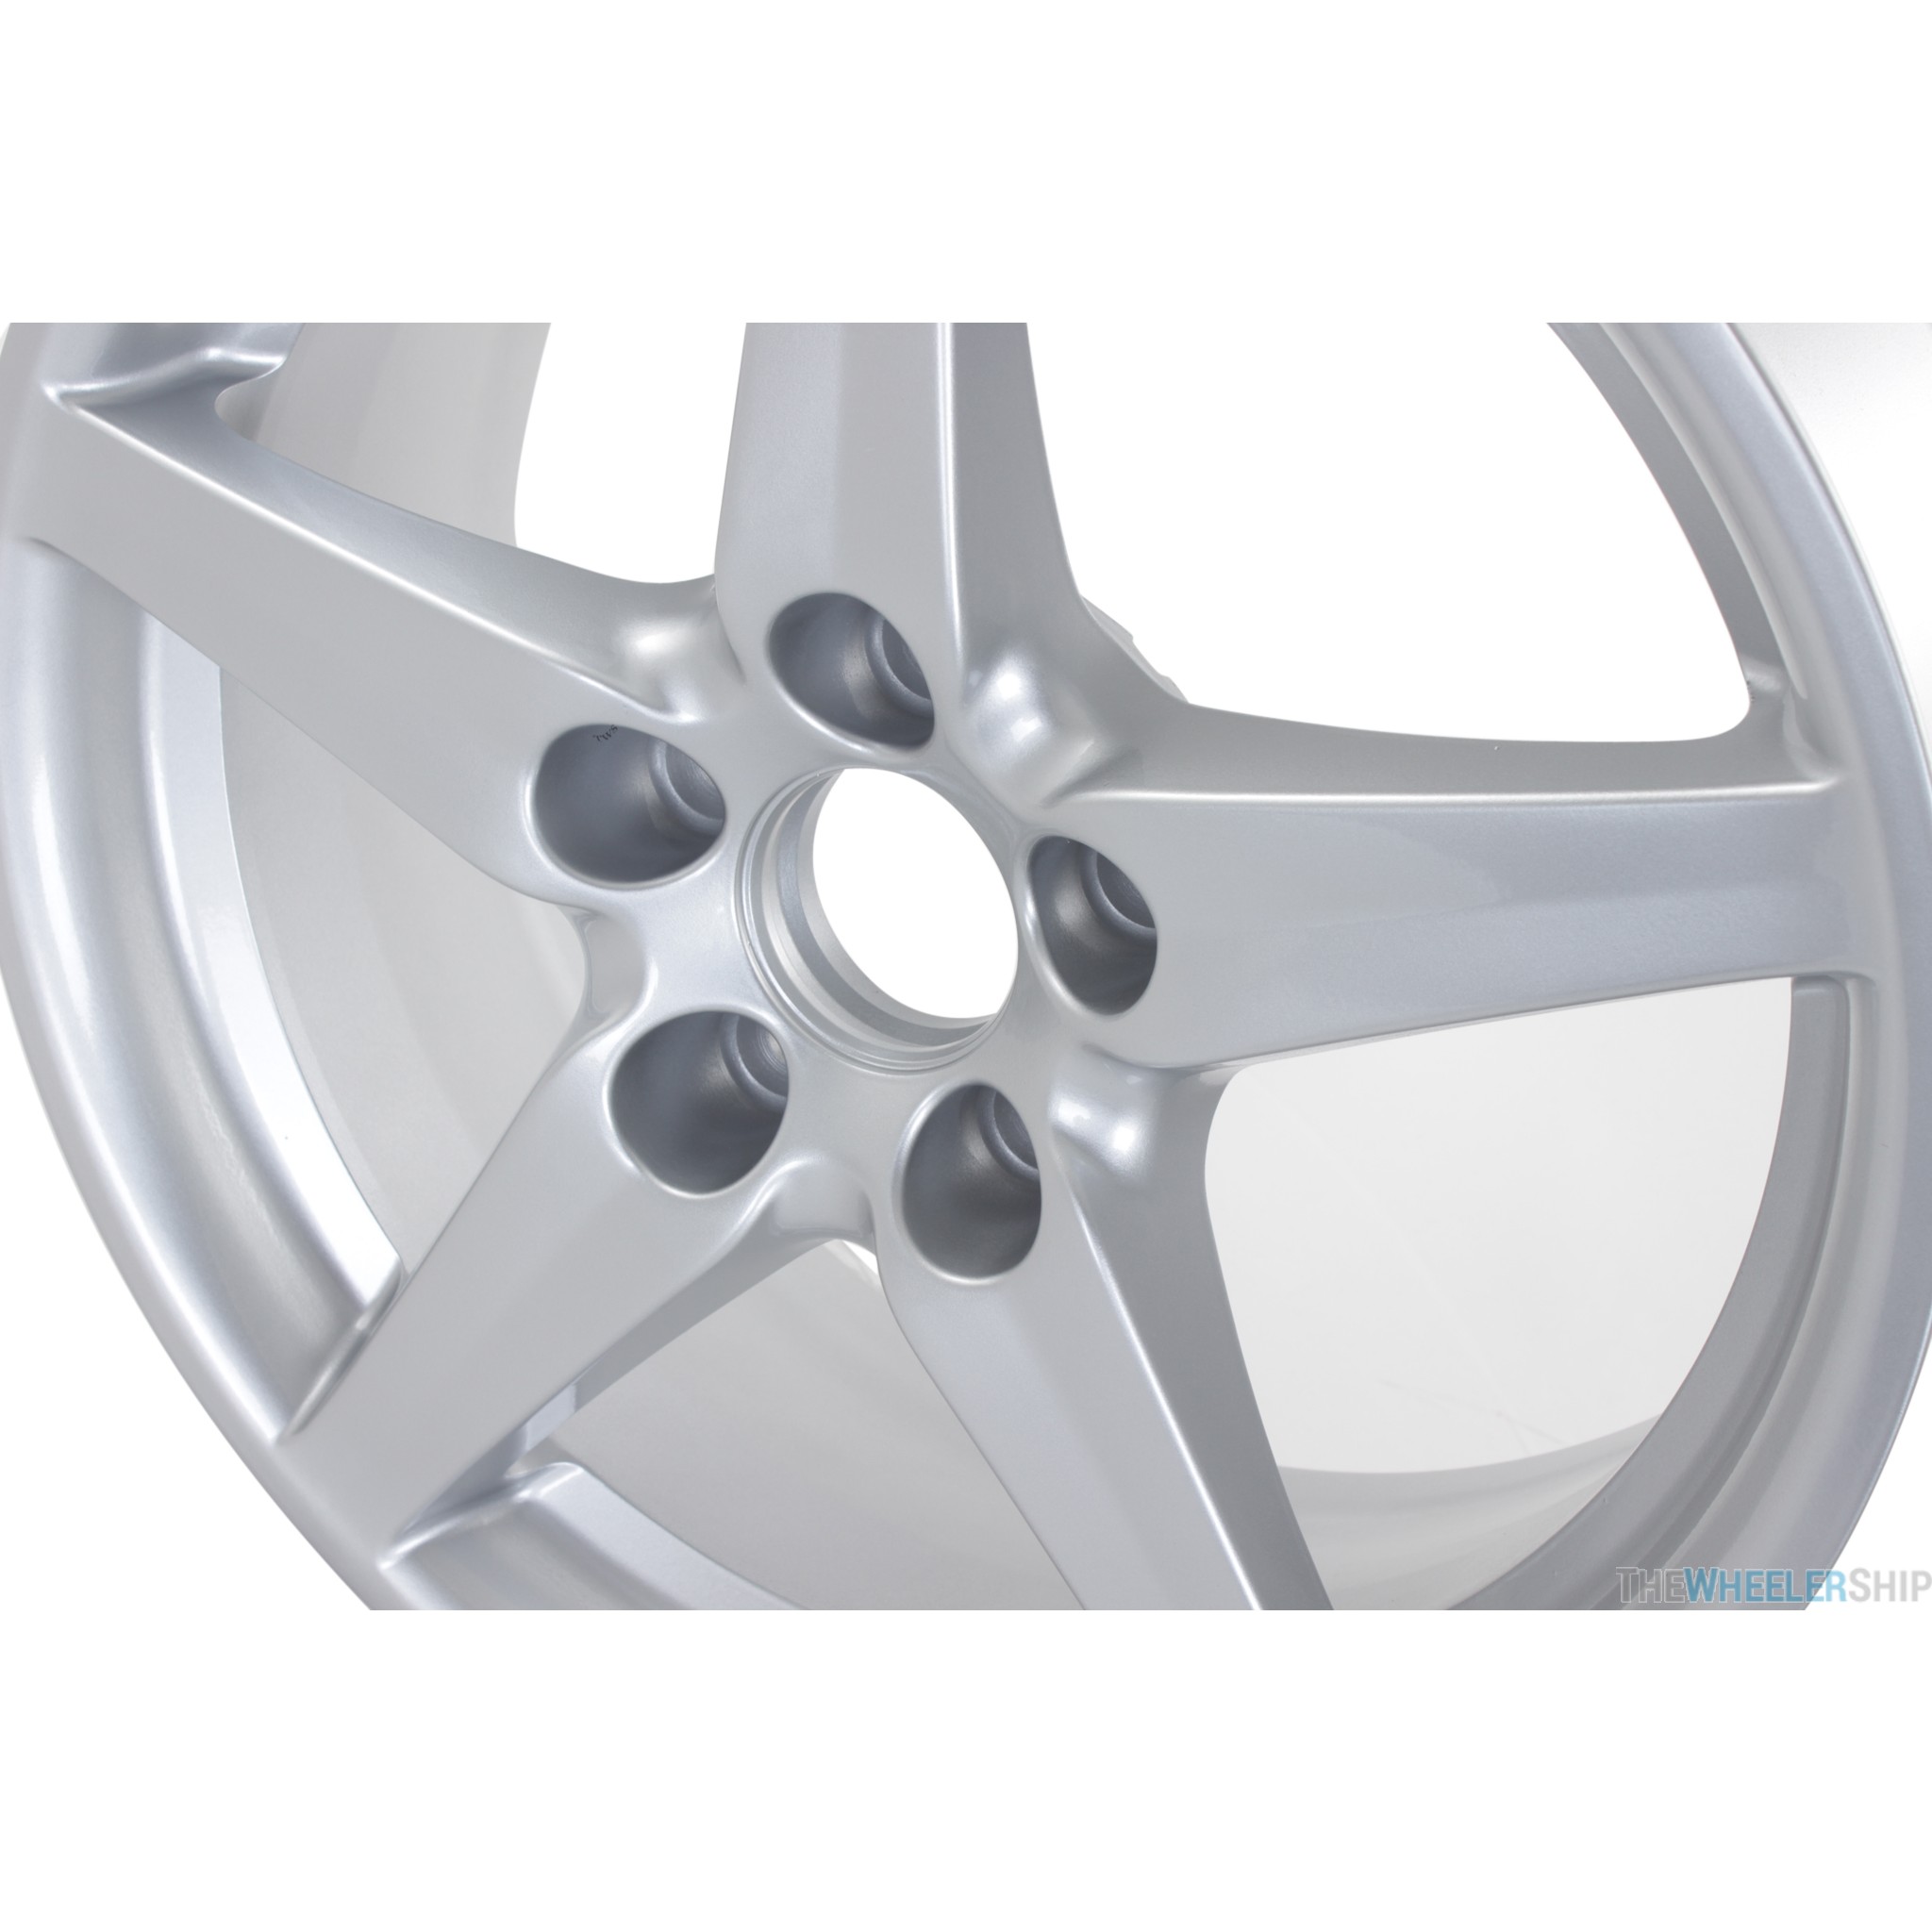 2005-2006 Acura RSX Type-S Wheels | 17" RSX Wheels for Sale